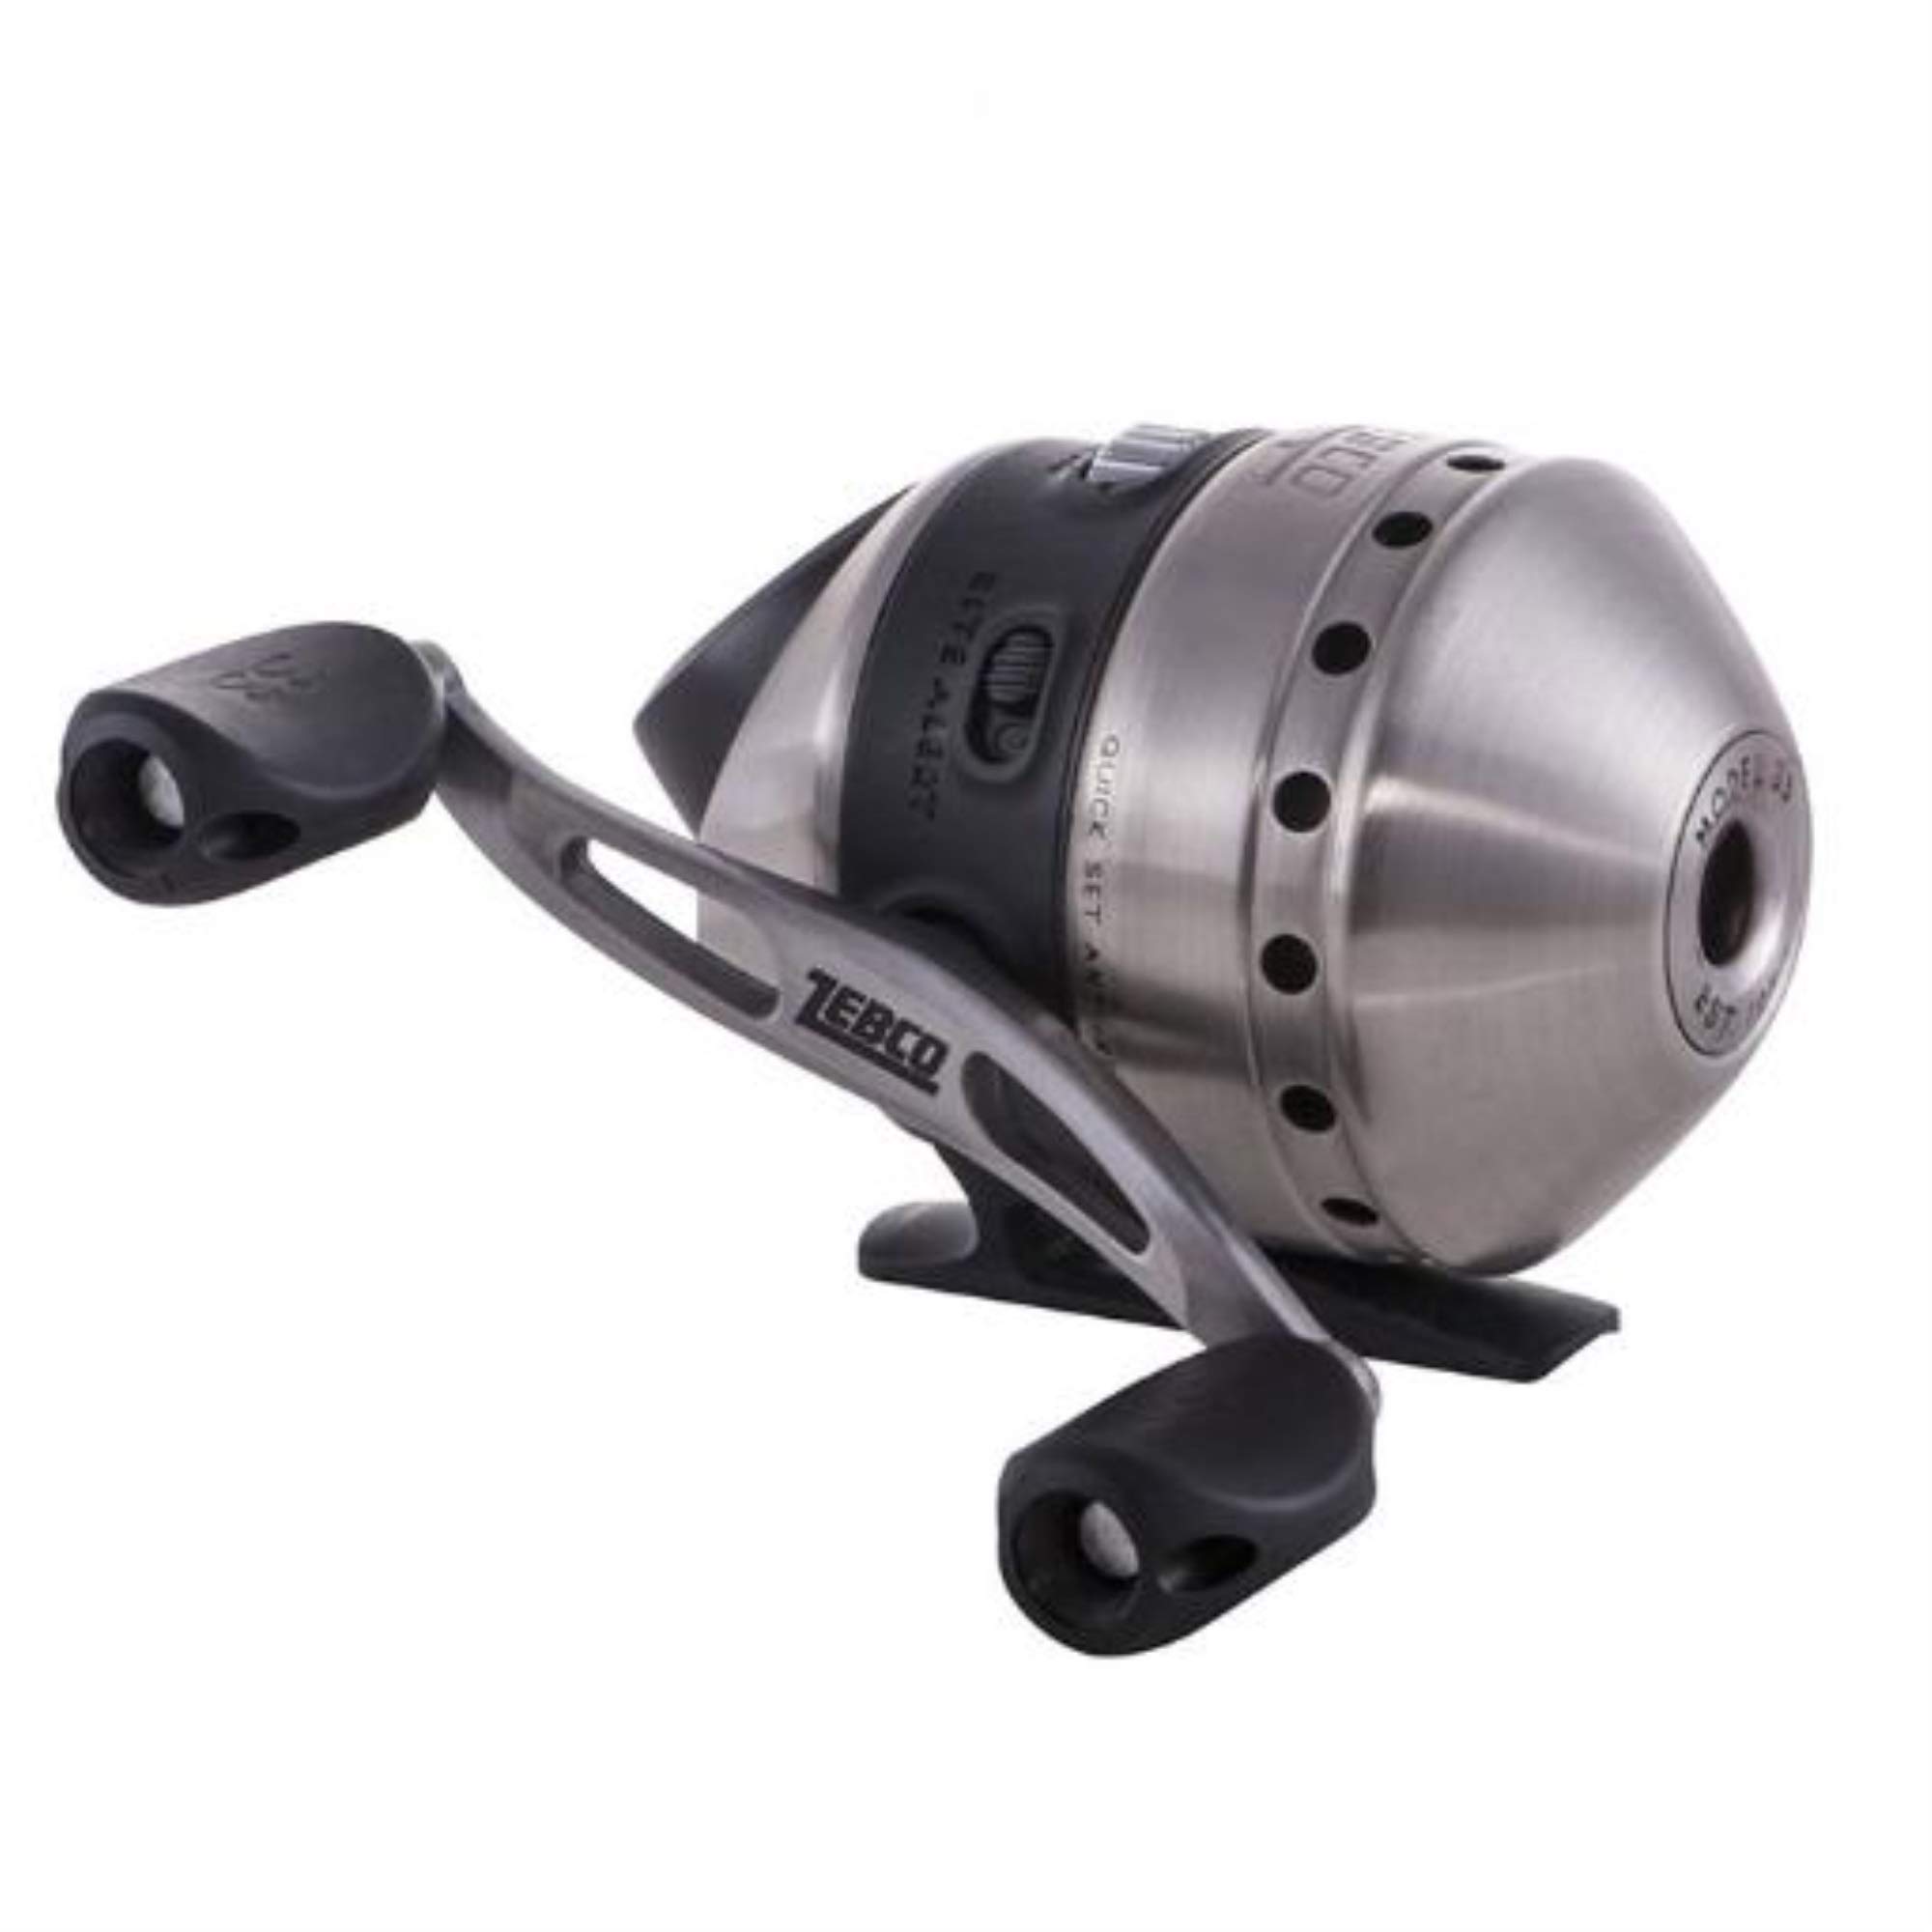 Zebco 33 Spincasting Rod and Reel Combo, 6' 2 Piece Combo - International  Society of Hypertension